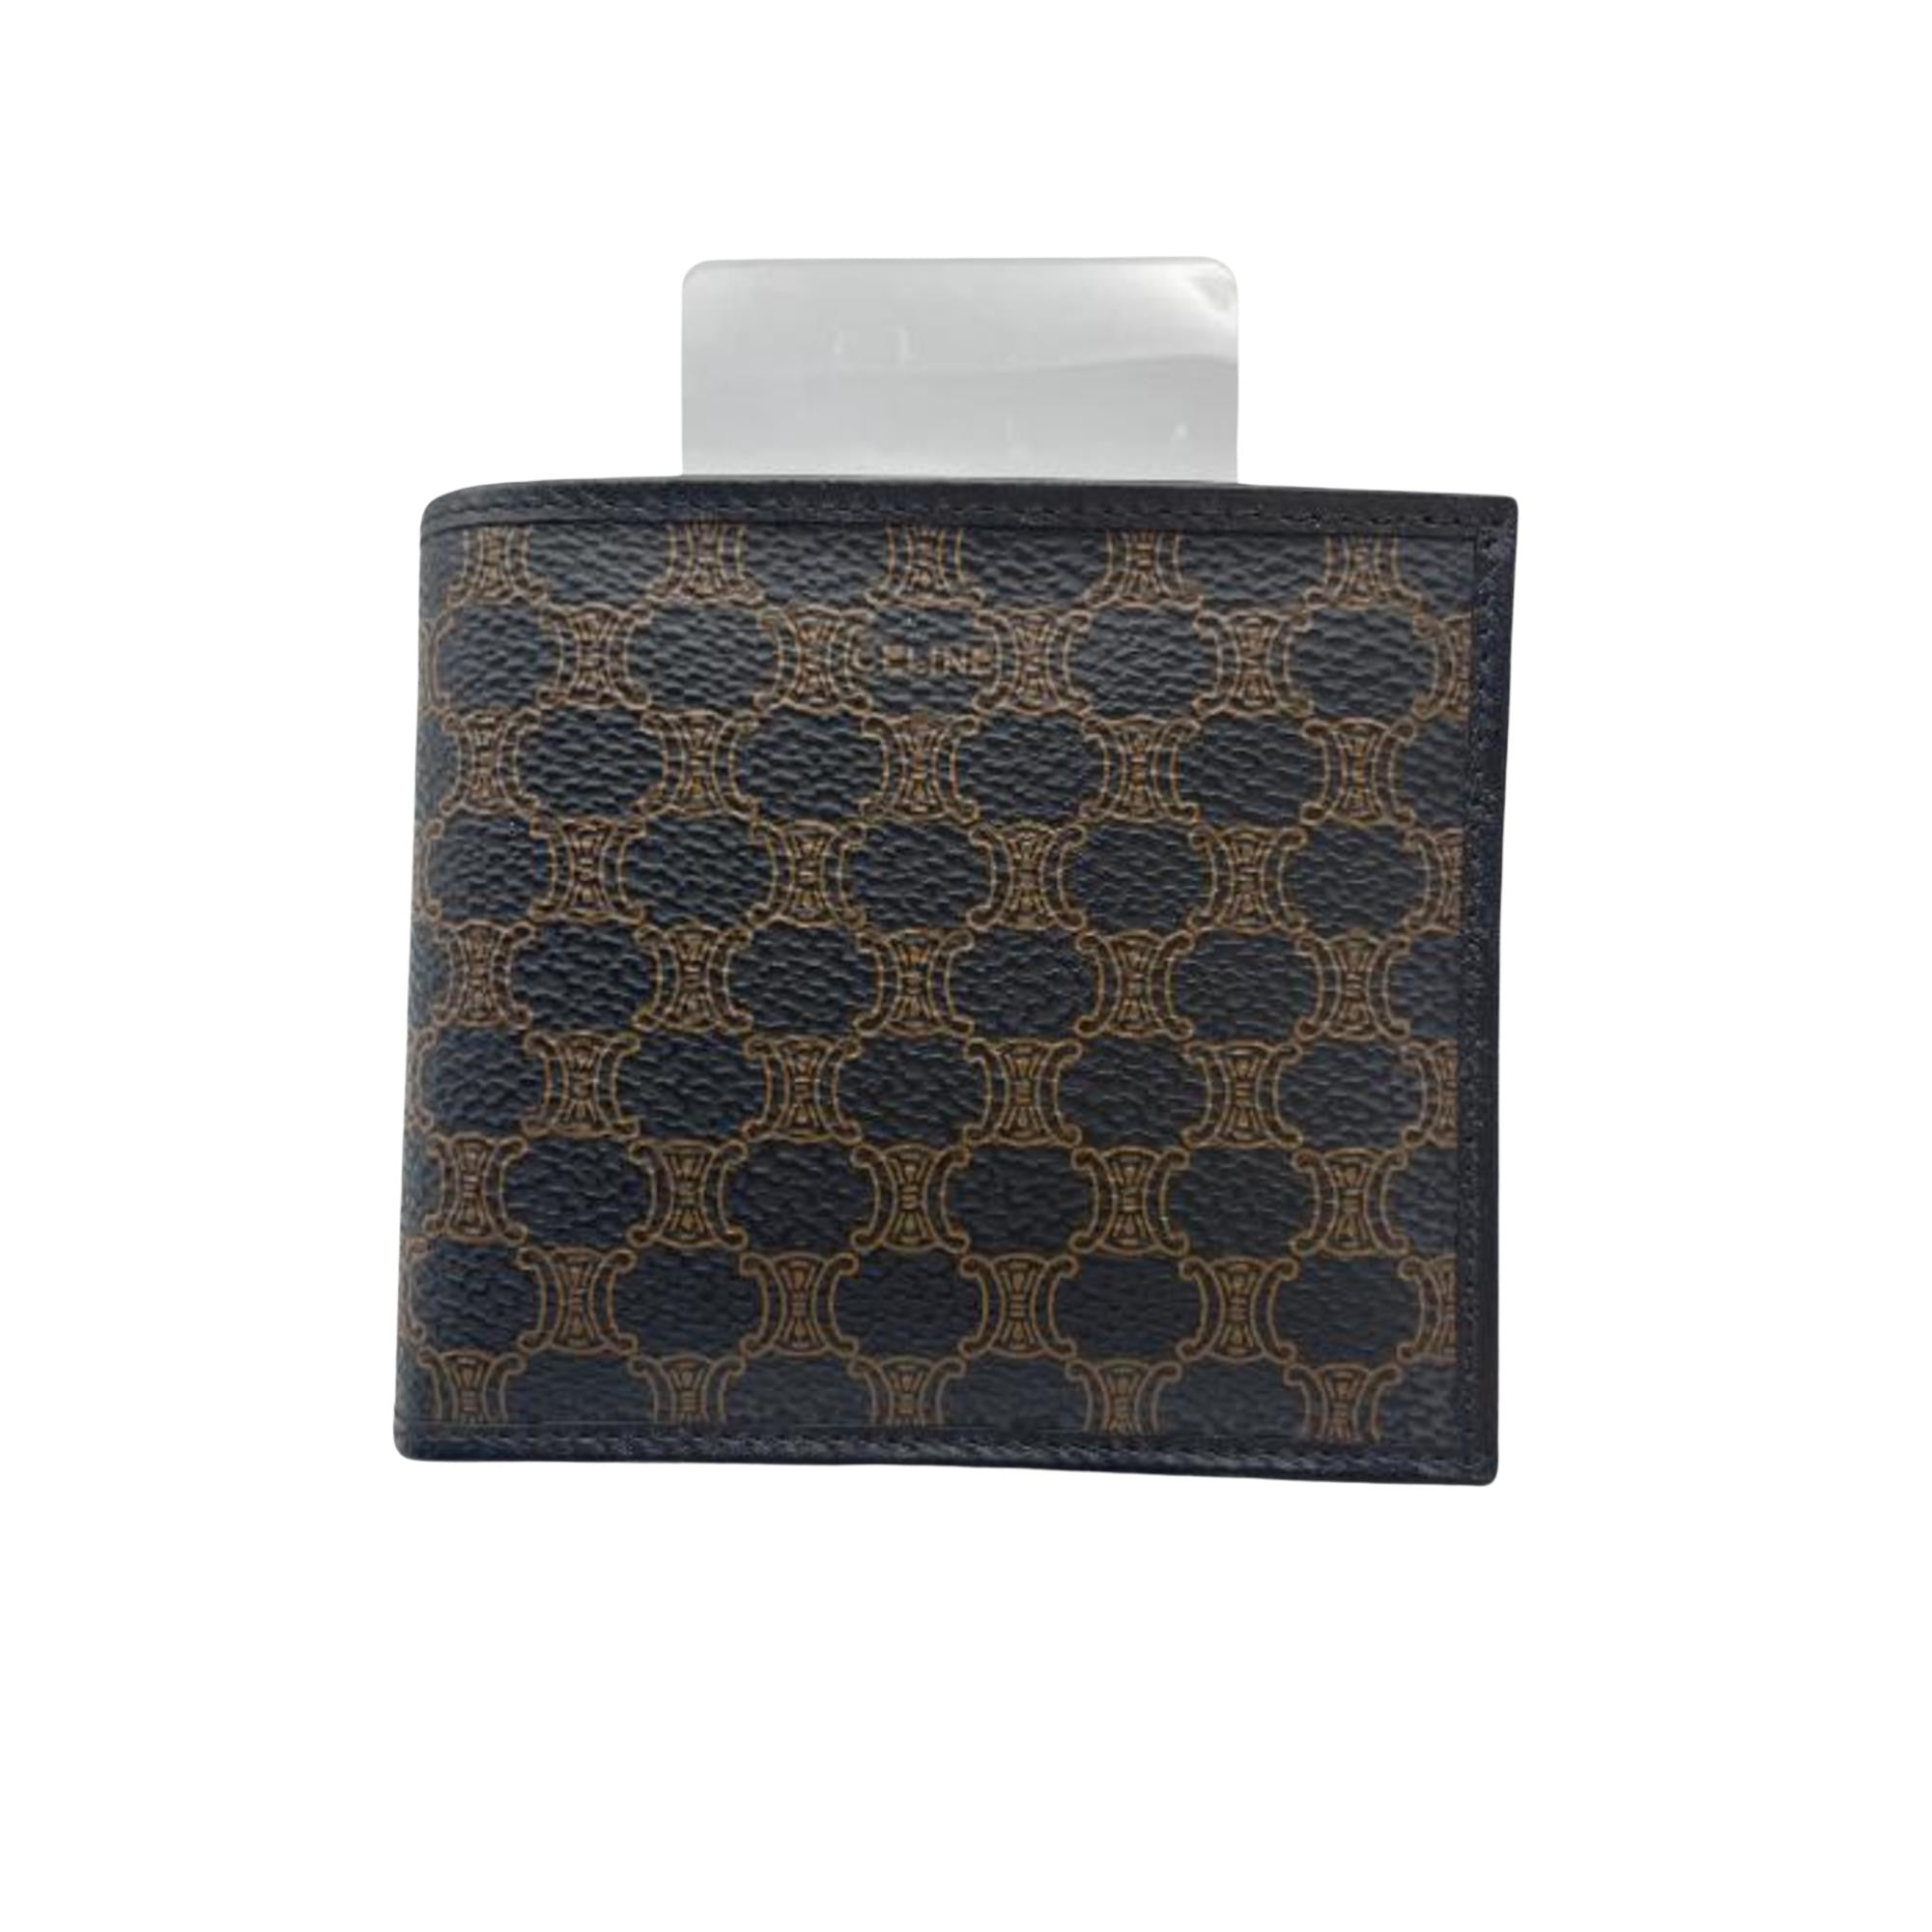 Triomphe Wallet